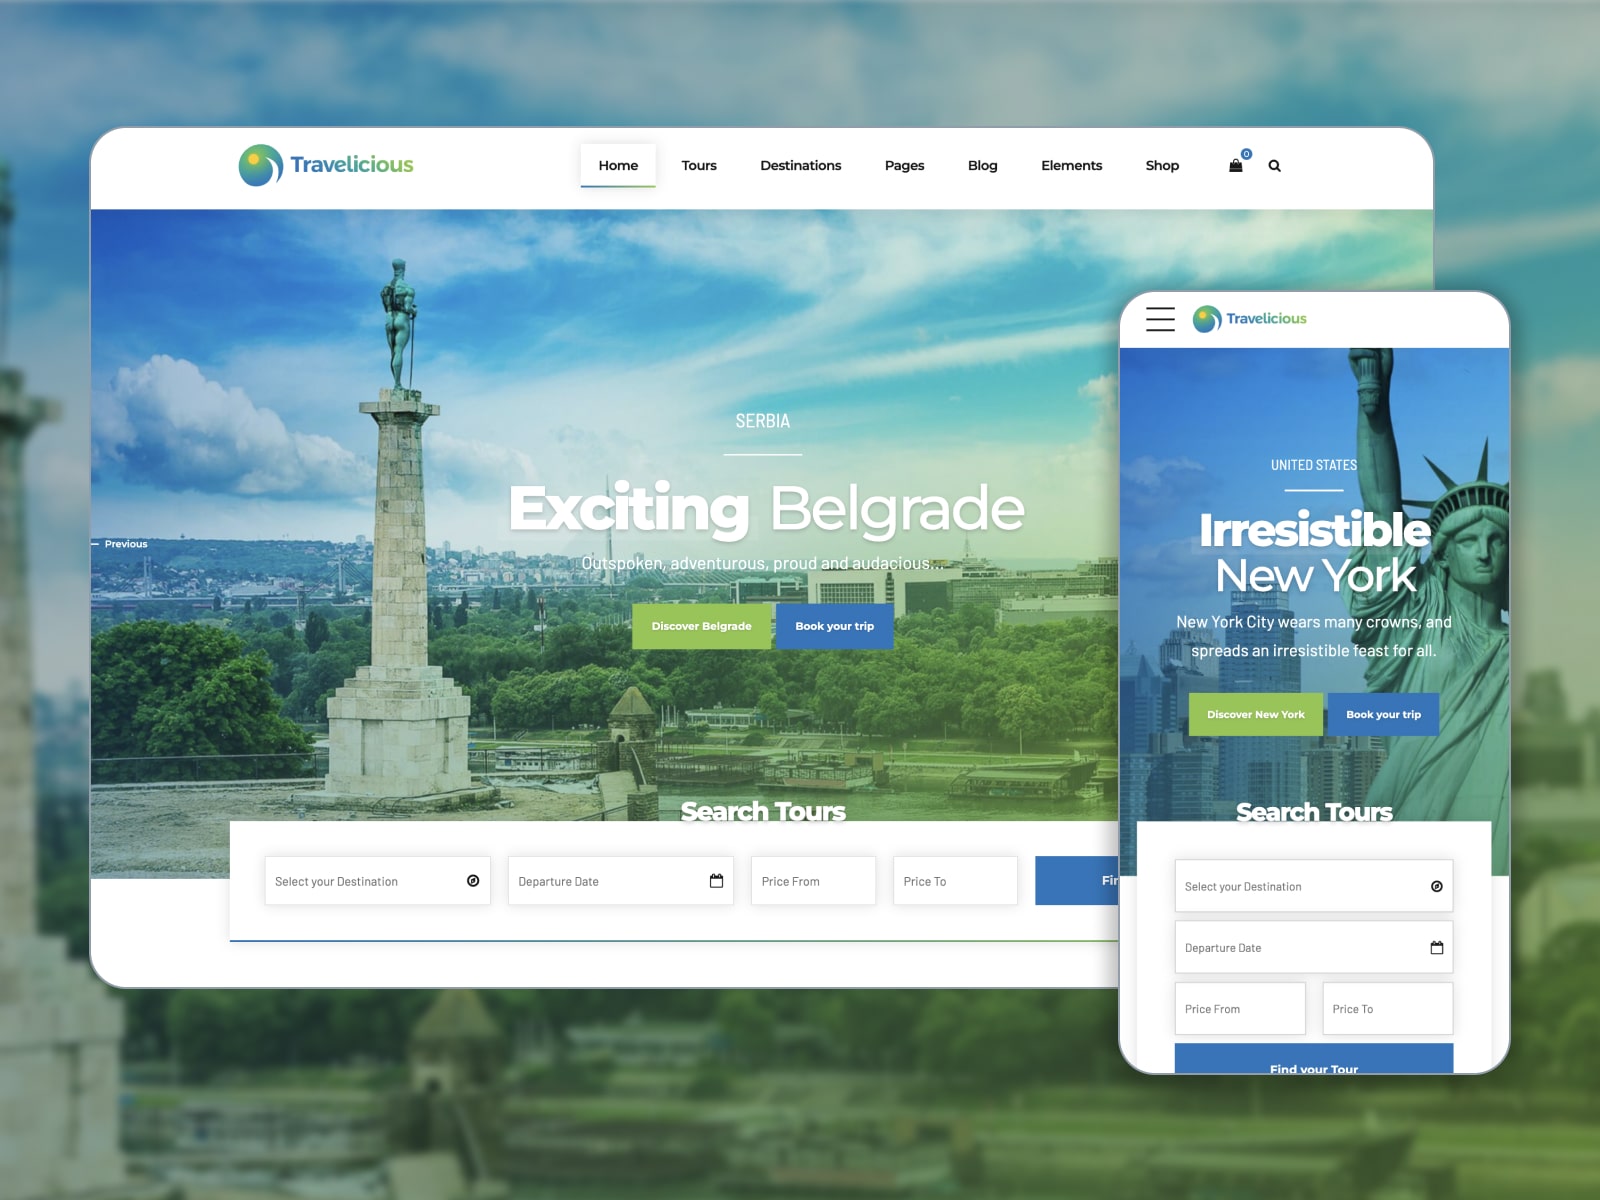 Collage of the Travelicious WordPress theme demo for travel agency websites in blue, green and white colors.